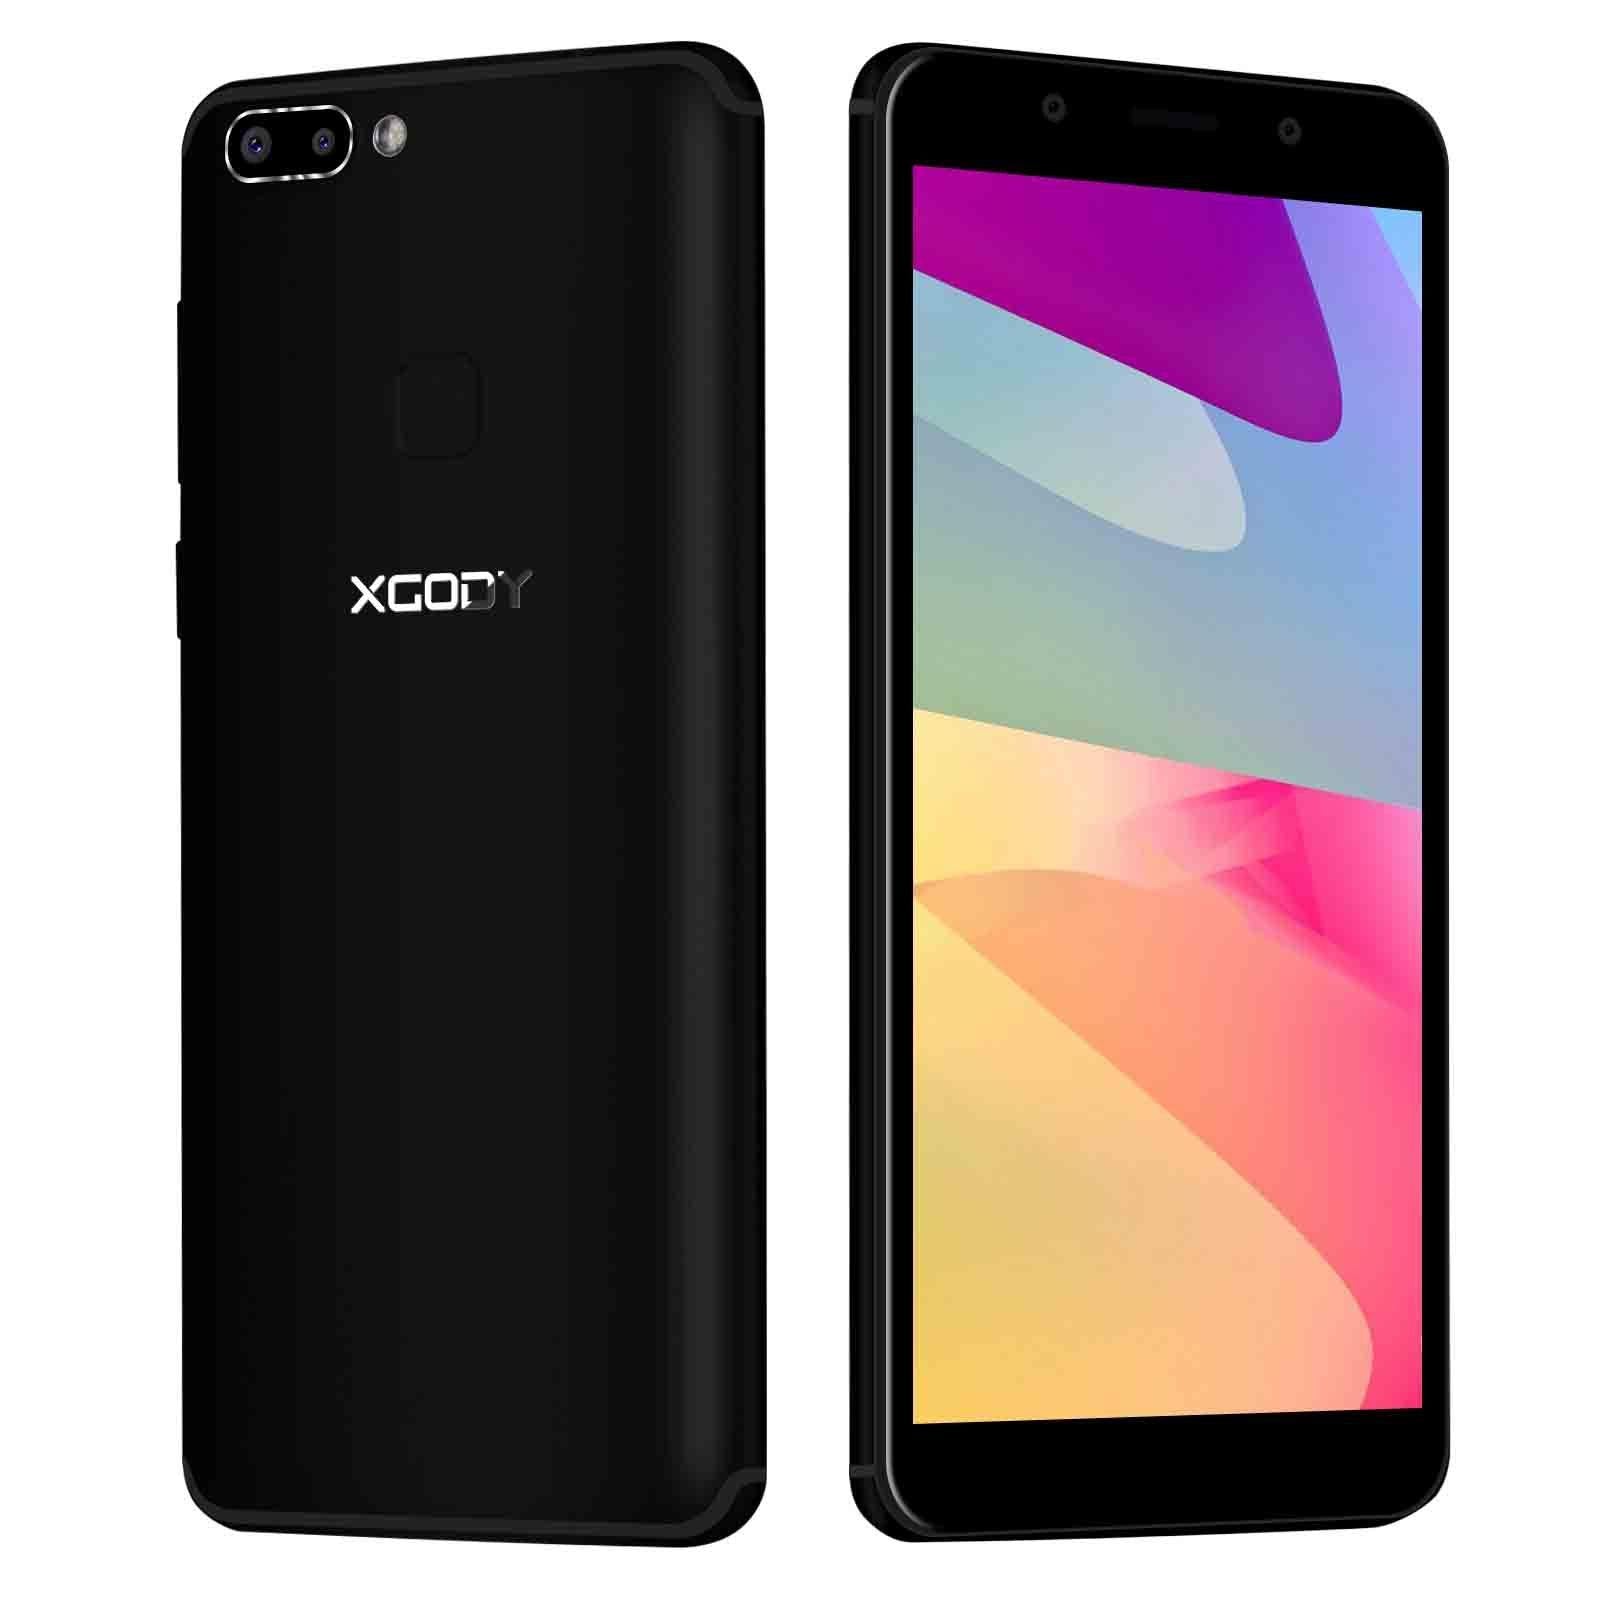 XGODY S14 Android 8.0 Micro SD Support Dual SIM Smart Phone